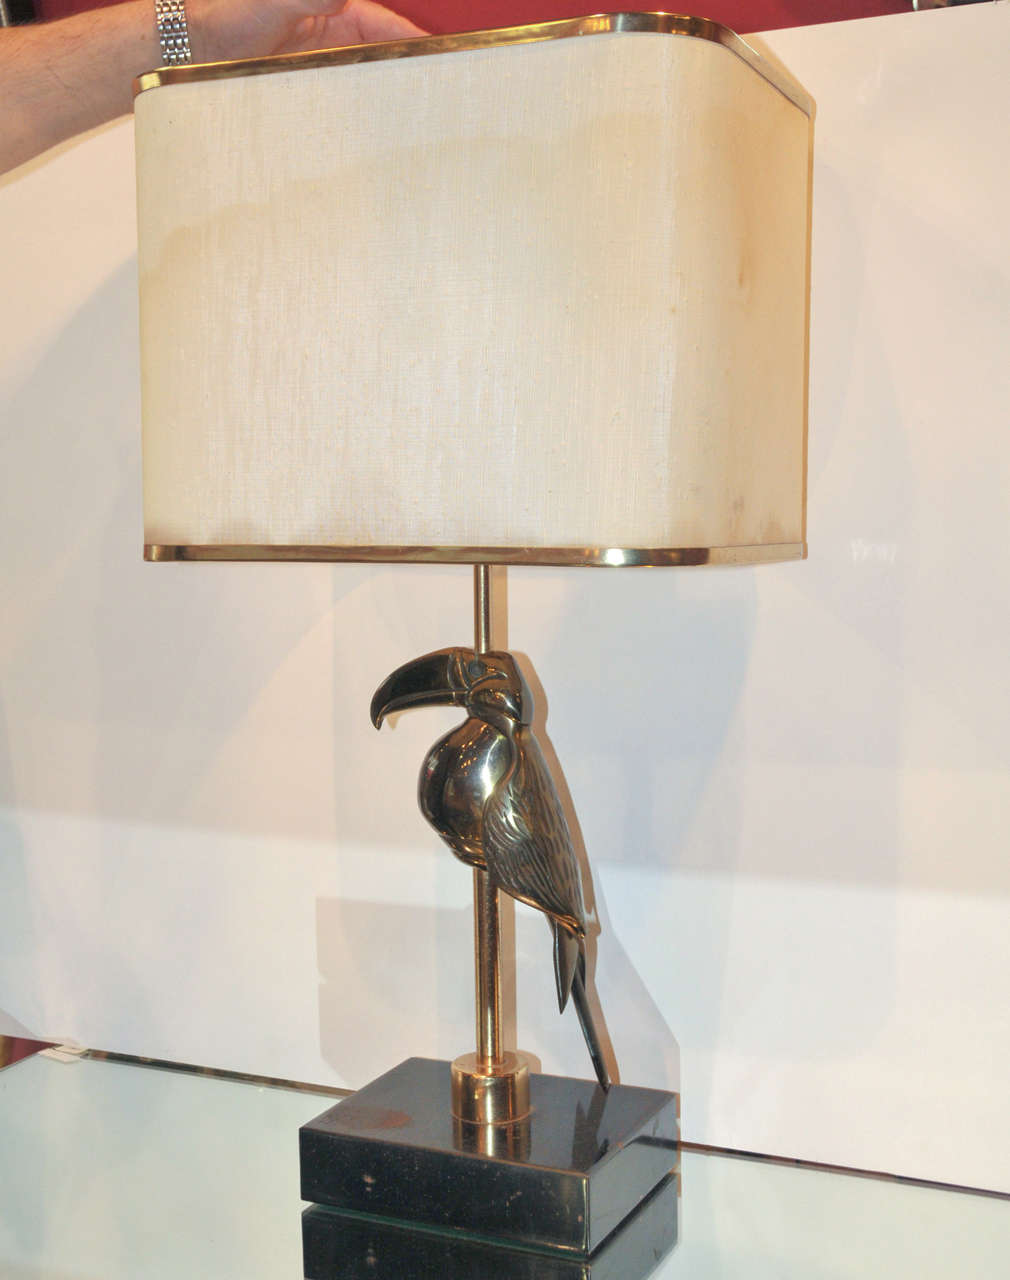 1970s lamp with a varnished patina bronze toucan on an iron base. Monogrammed 